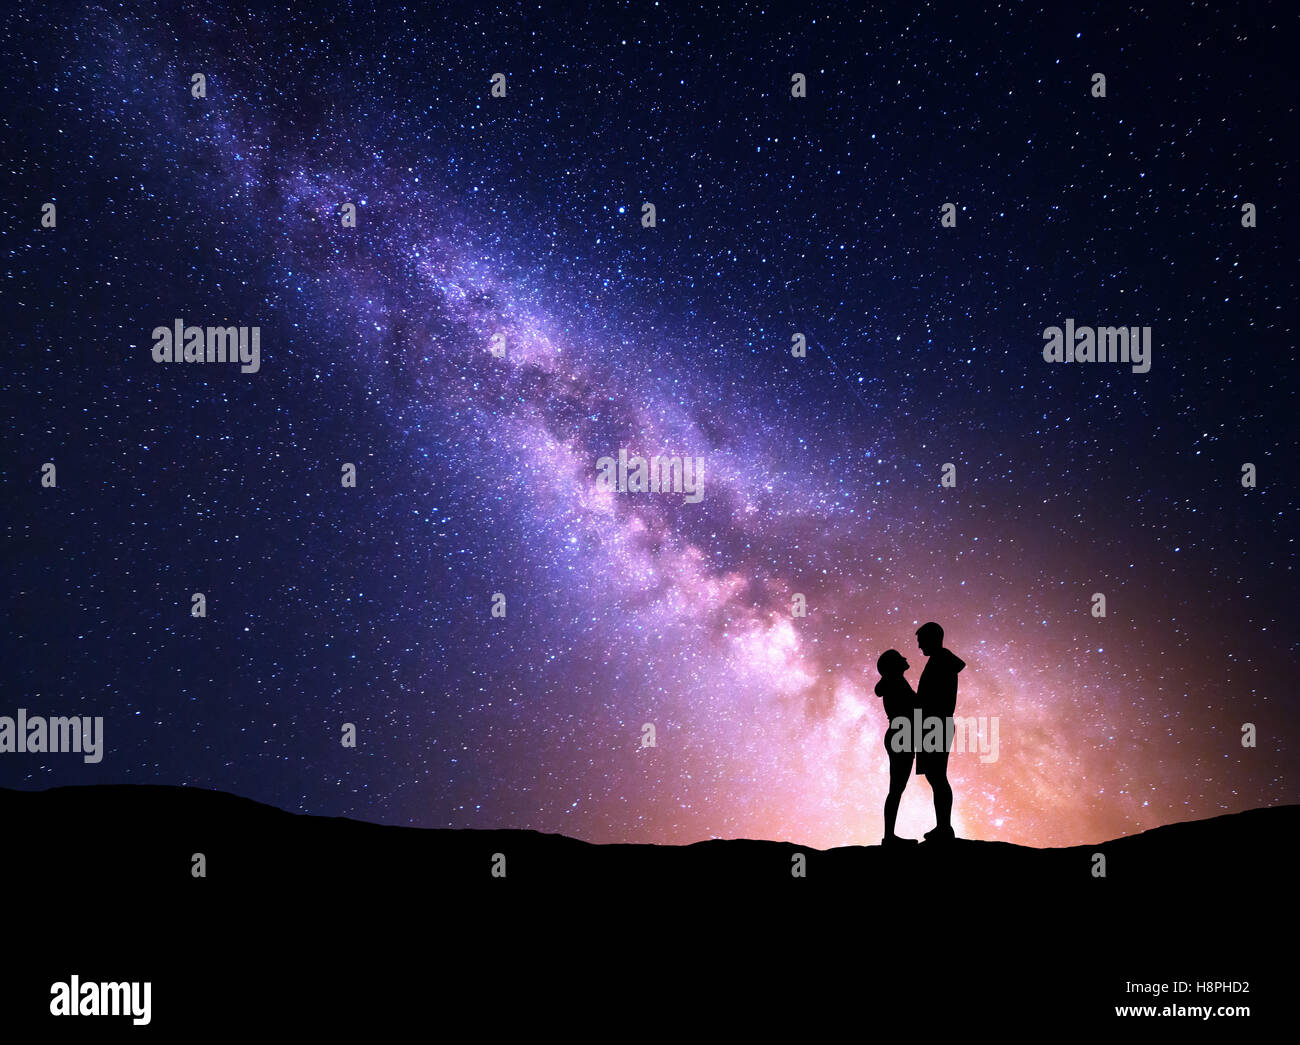 Milky Way with silhouette of people. Landscape with night starry sky. Standing man and woman on the mountain with yellow light. Stock Photo